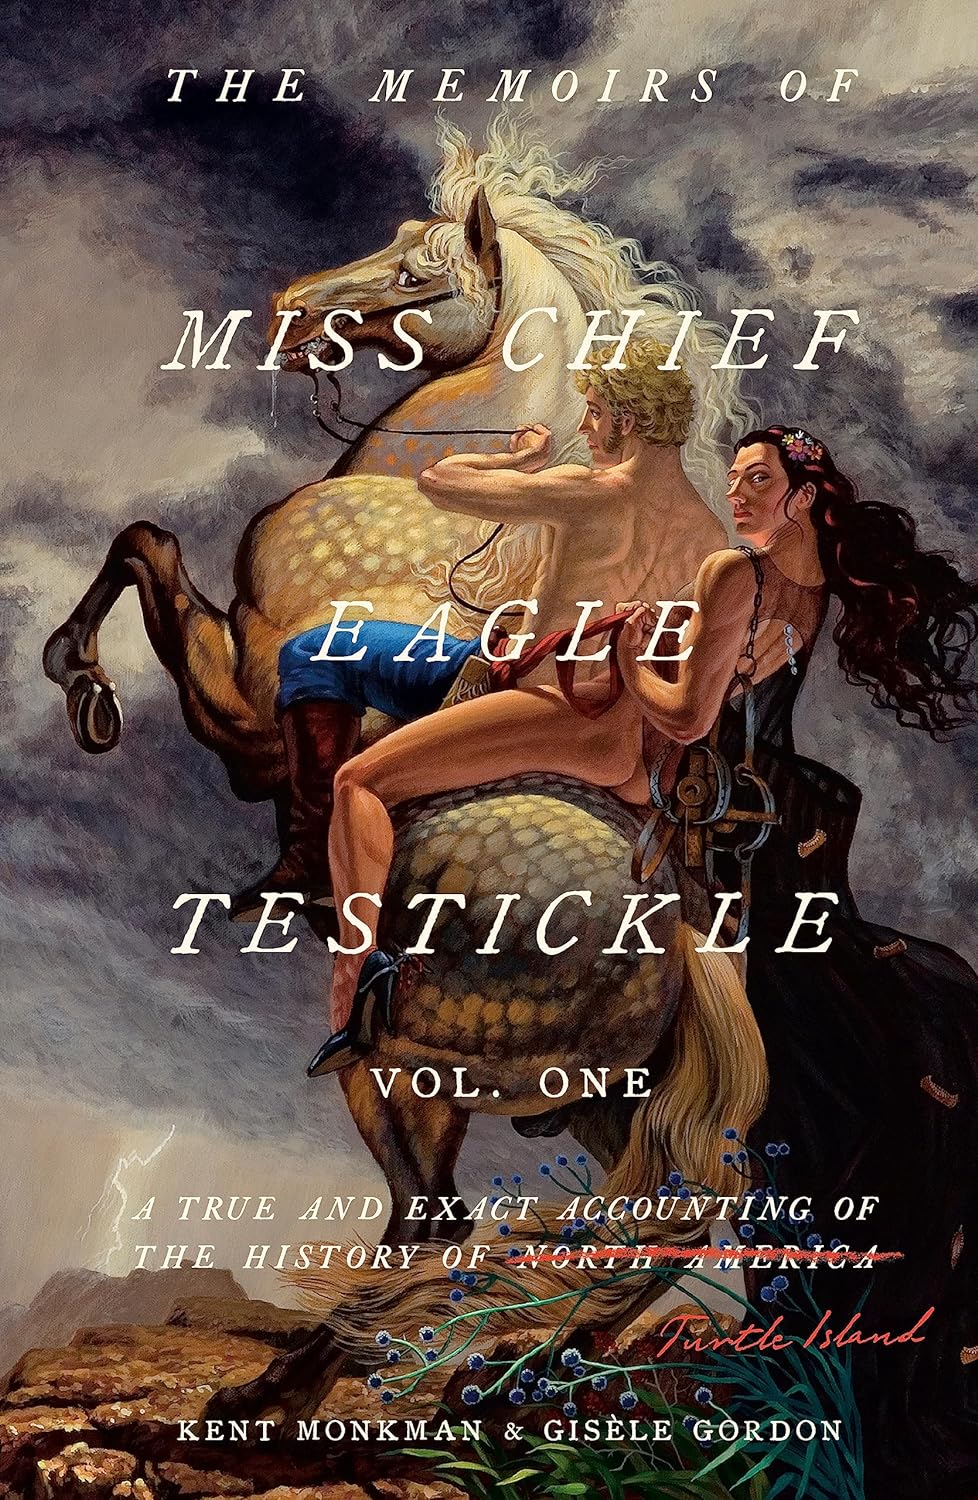  The Memoirs of Miss Chief Eagle Testickle: Vol. 1: A True and Exact Accounting of the History of Turtle Island by Kent Monkman & Gisèle Gordon 